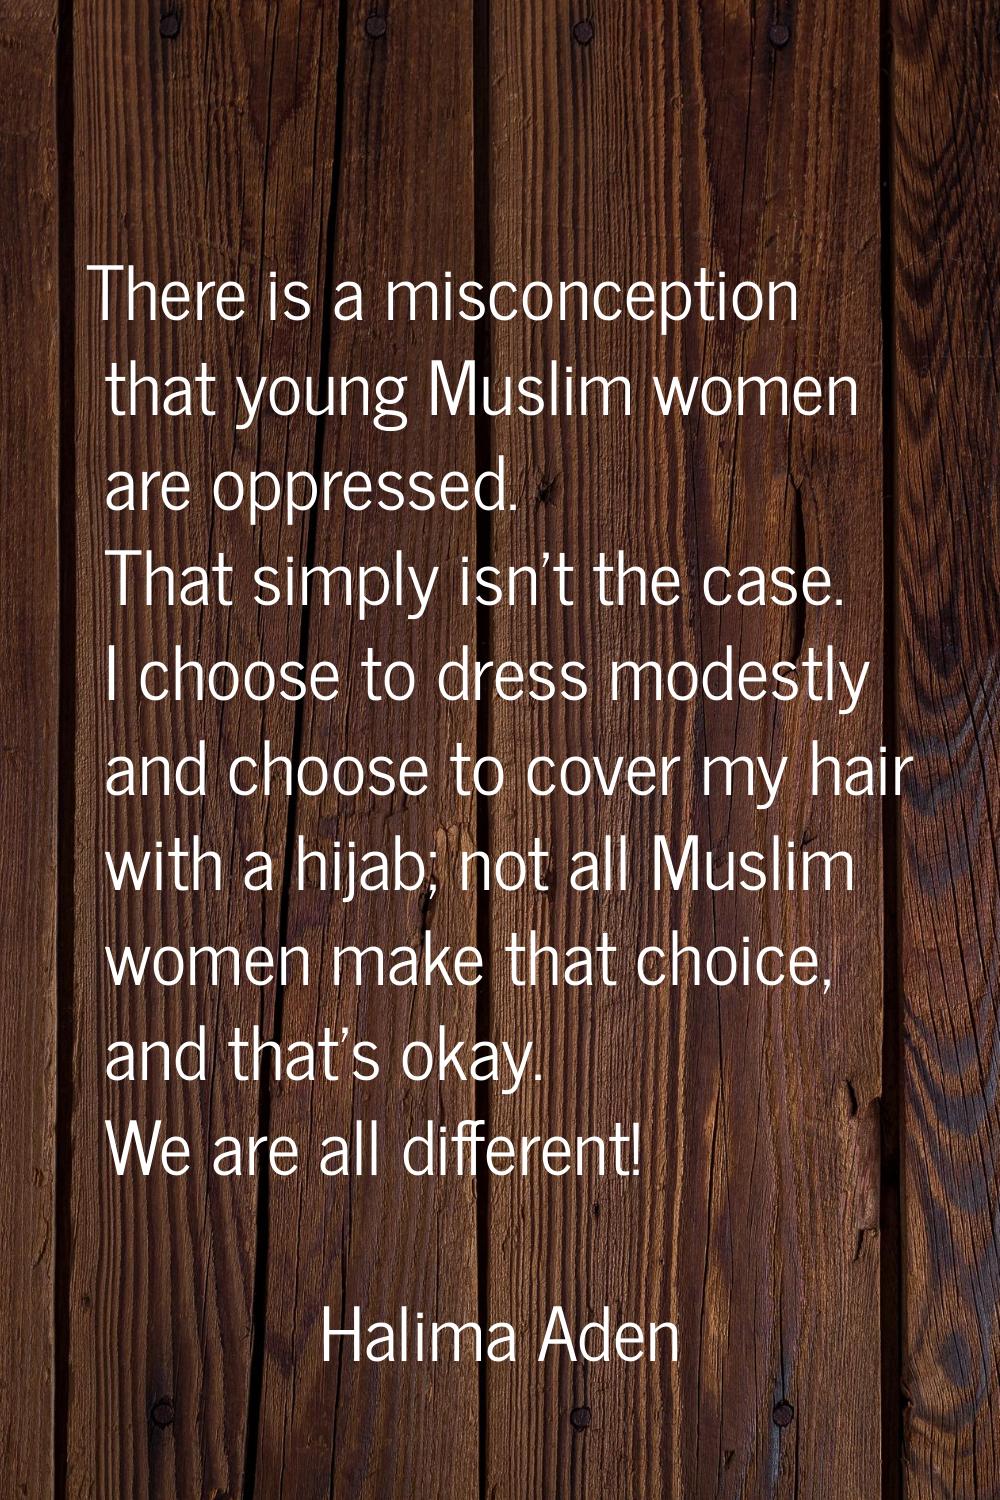 There is a misconception that young Muslim women are oppressed. That simply isn't the case. I choos